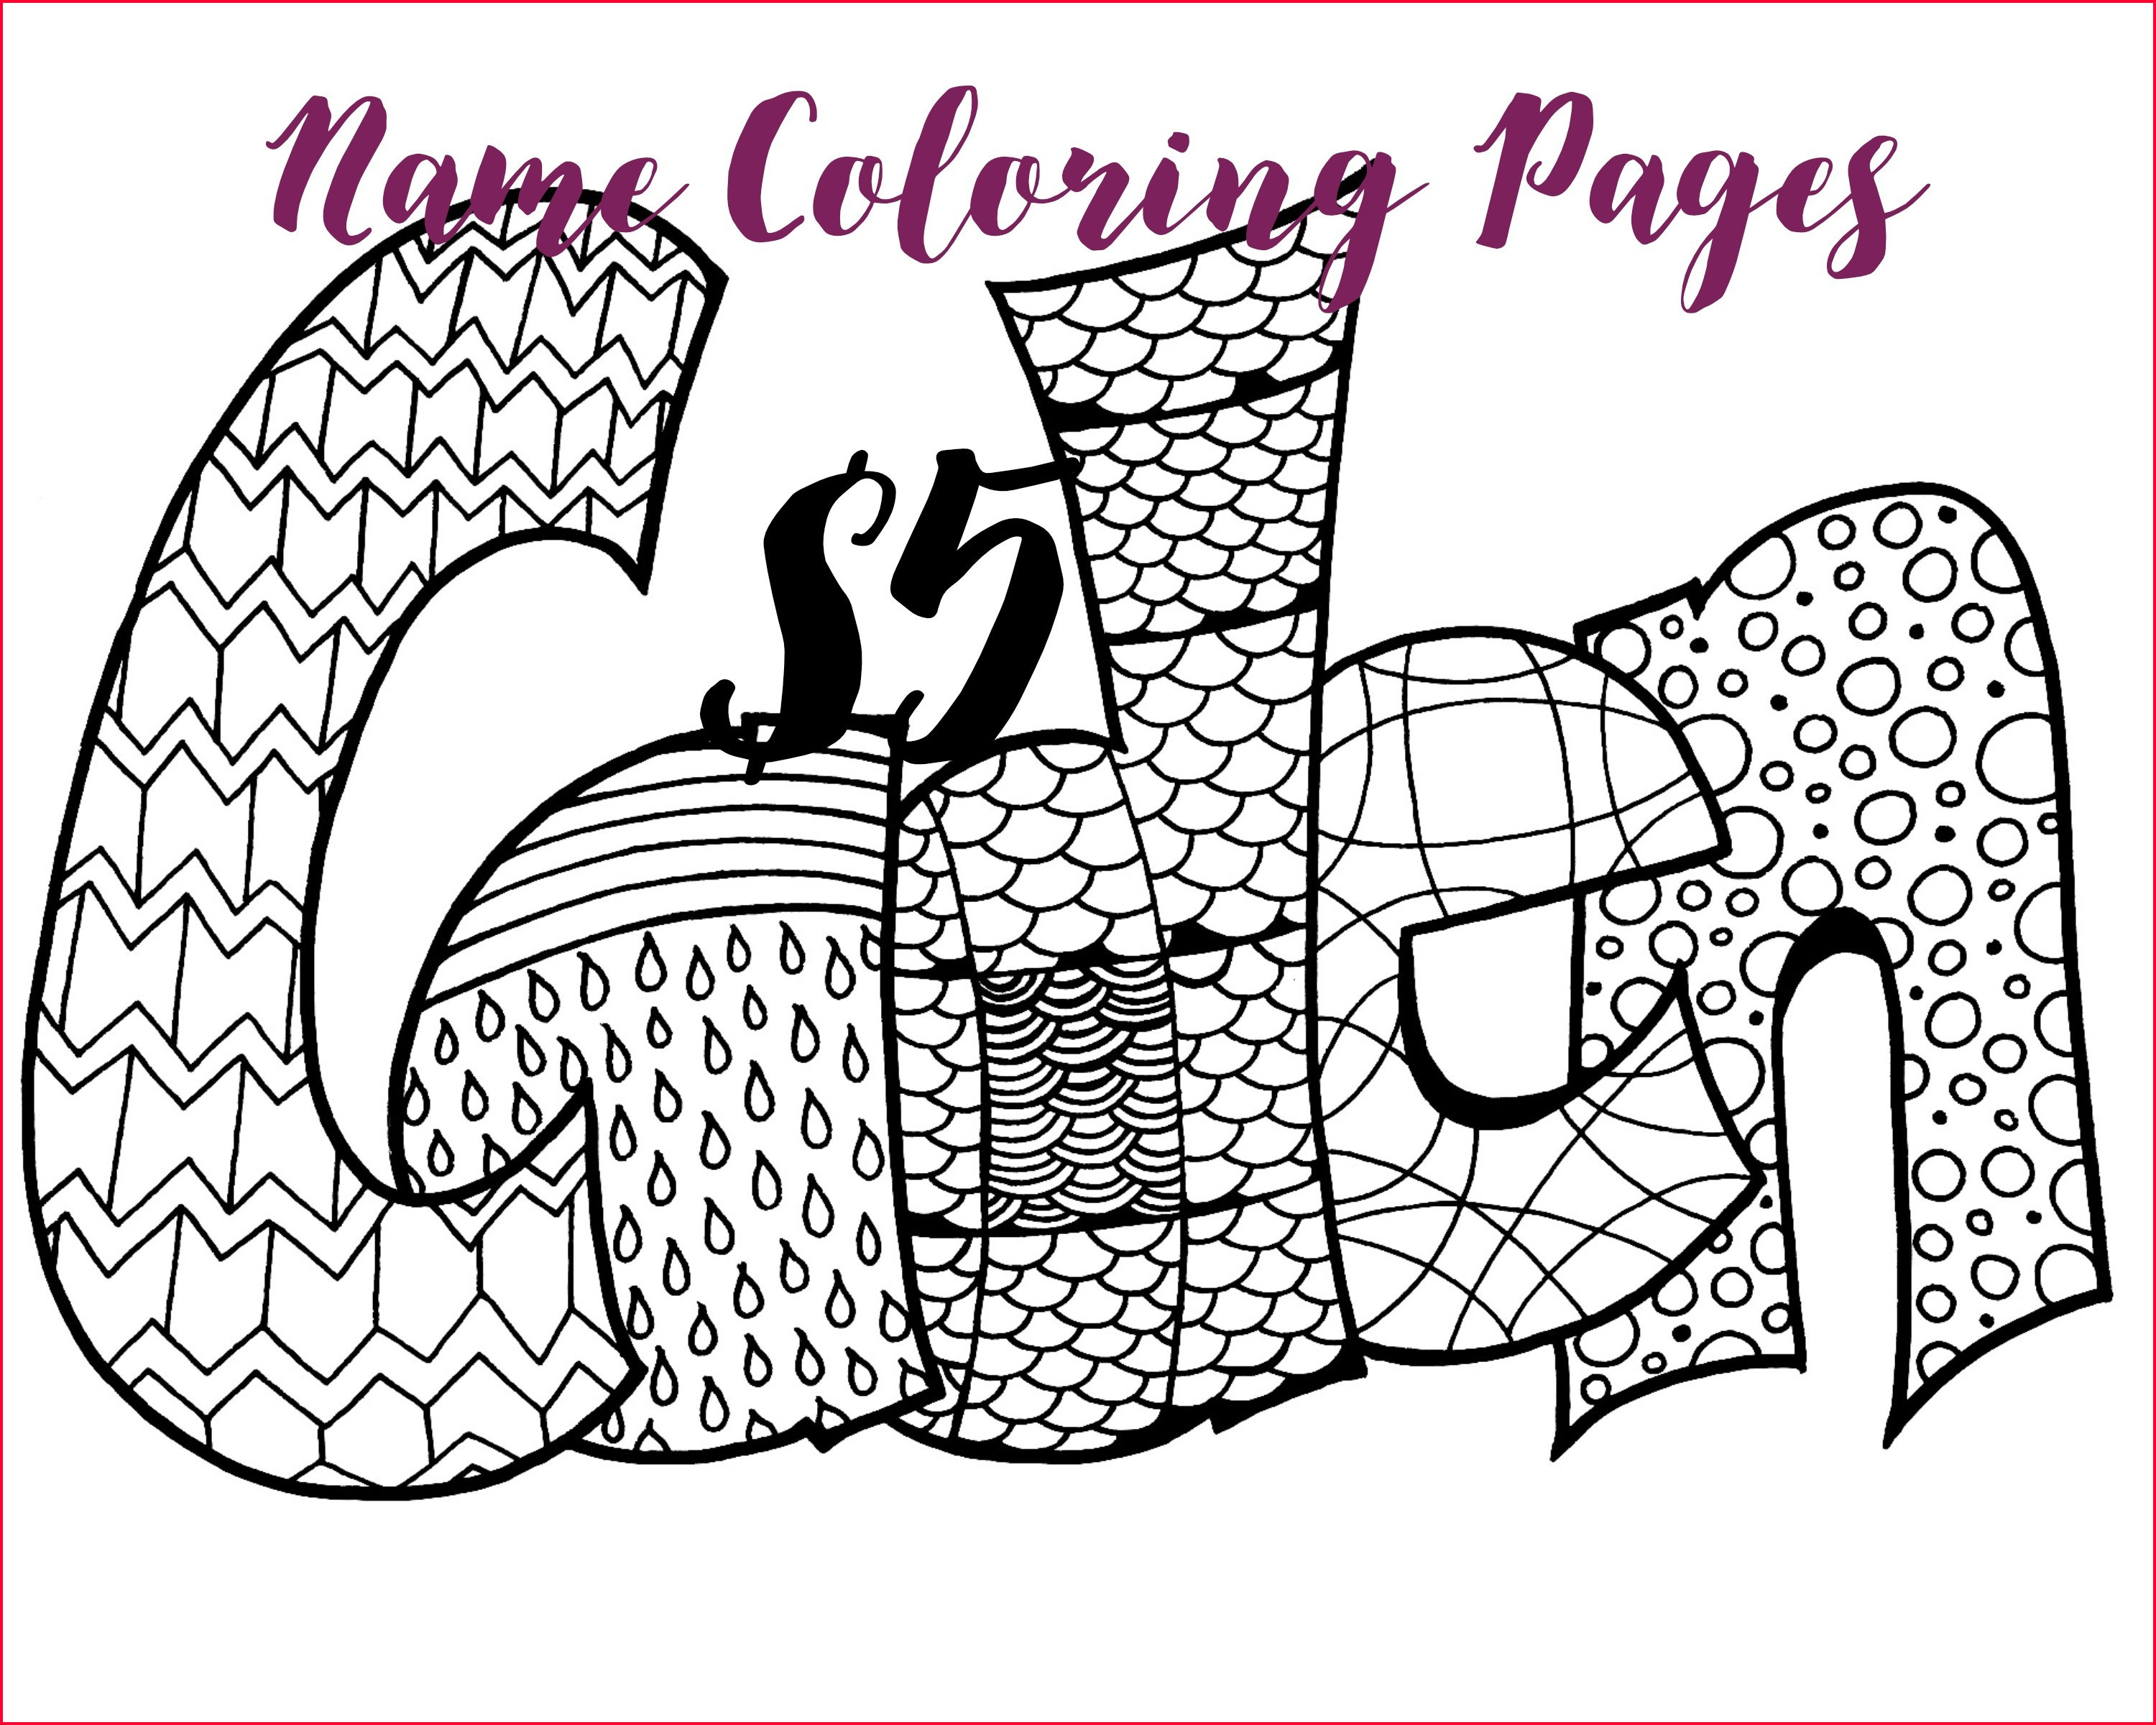 Personalized Coloring Pages Coloring Pages Free Printable Personalized Coloring Sheets